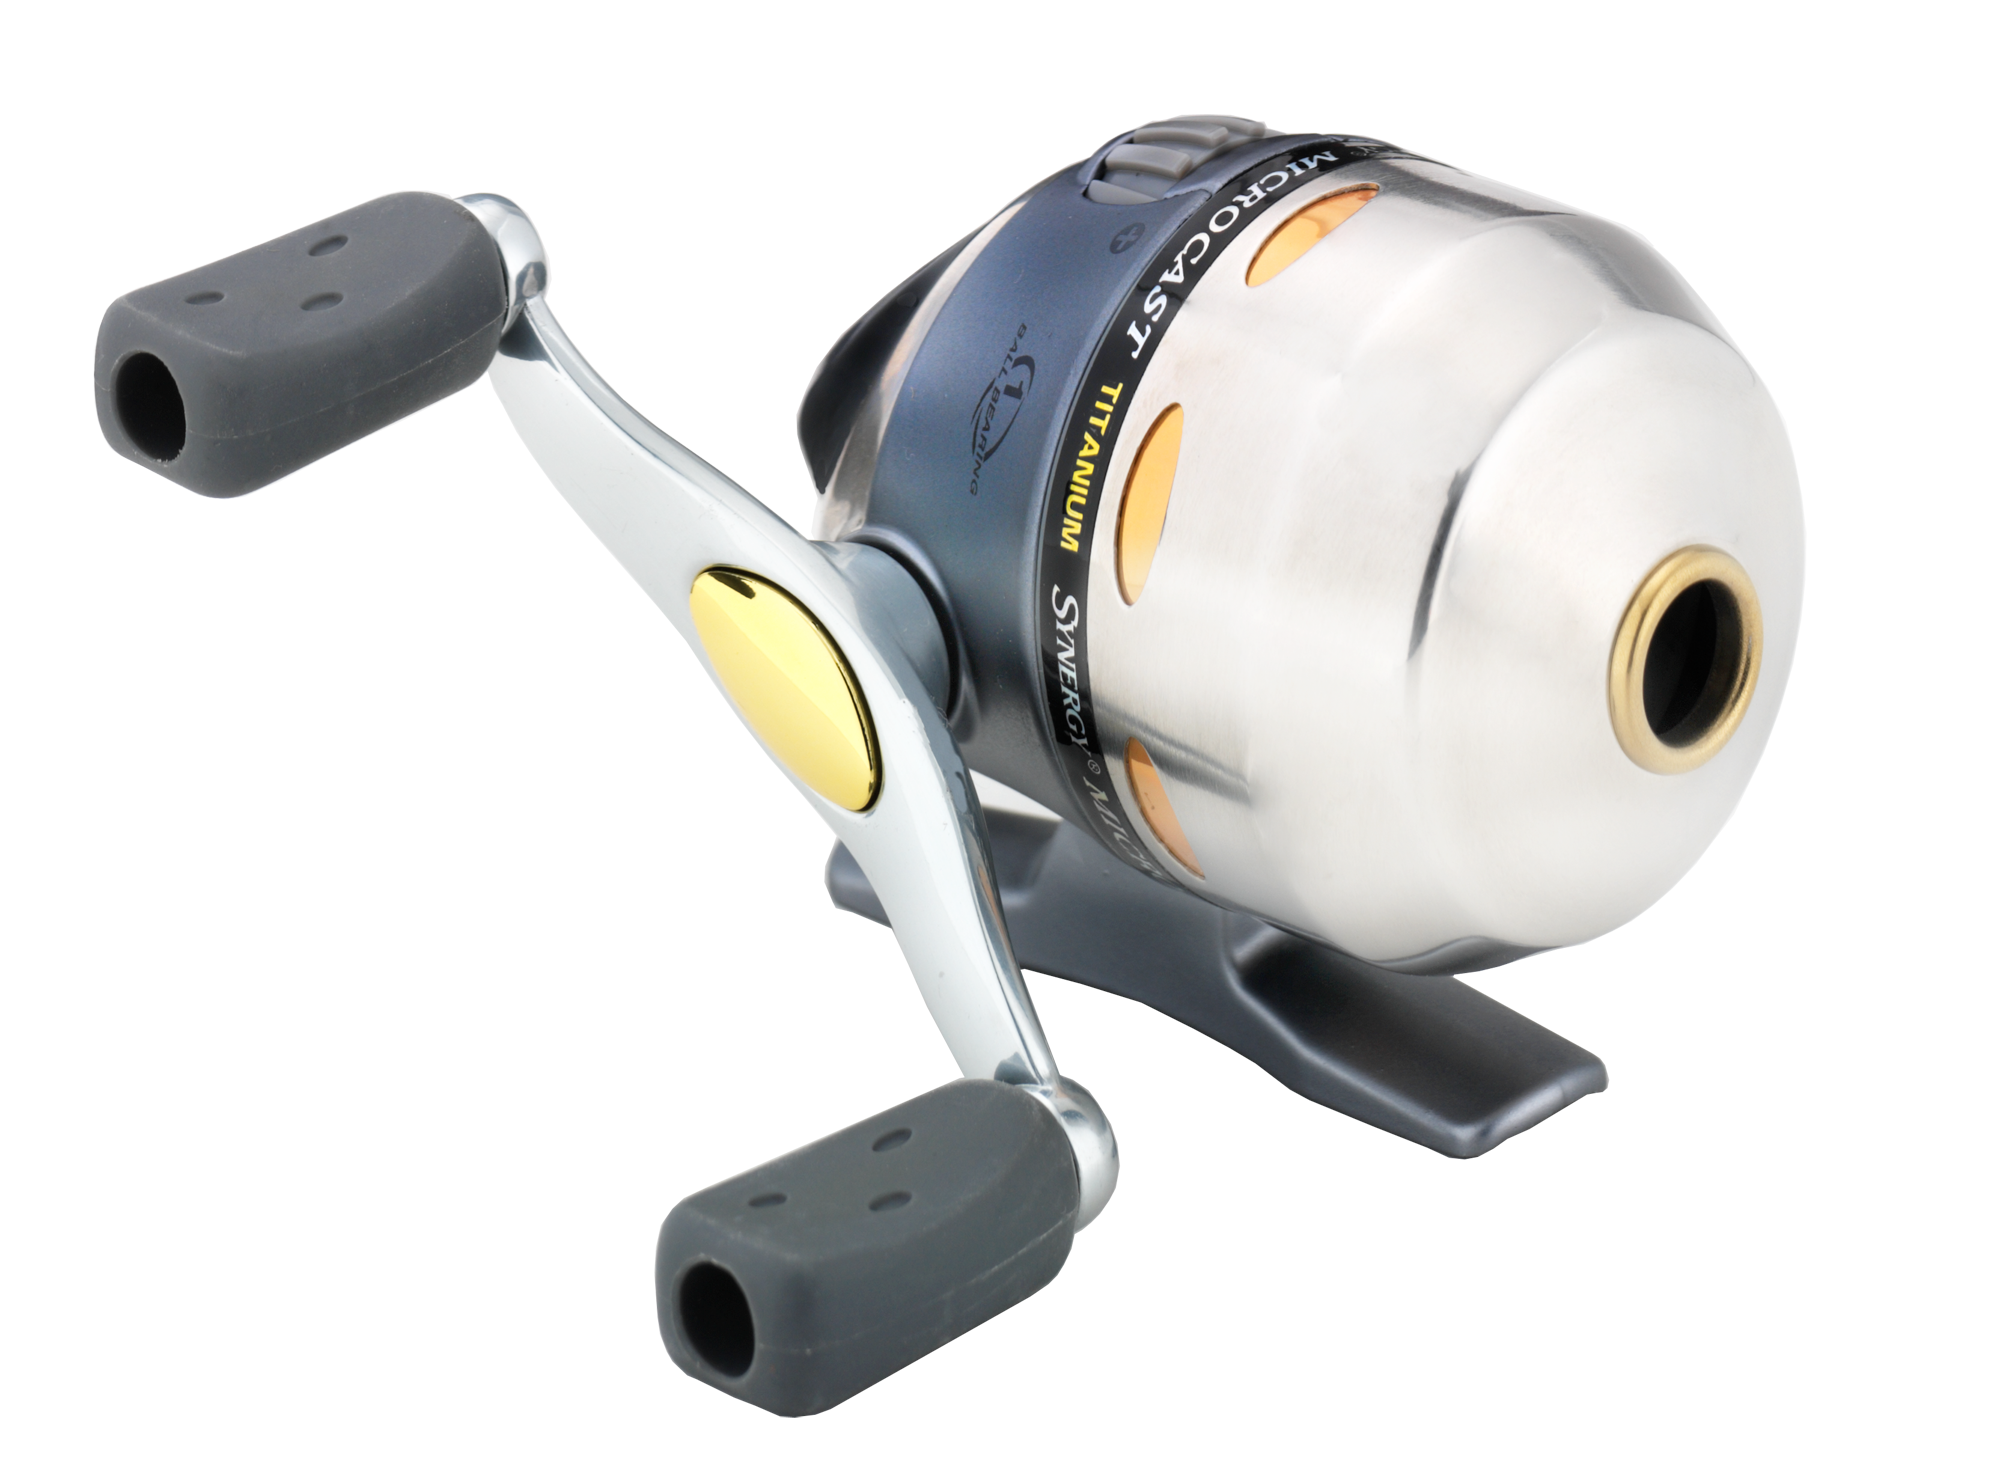 Shakespeare Synergy Microspin Spincast Reel